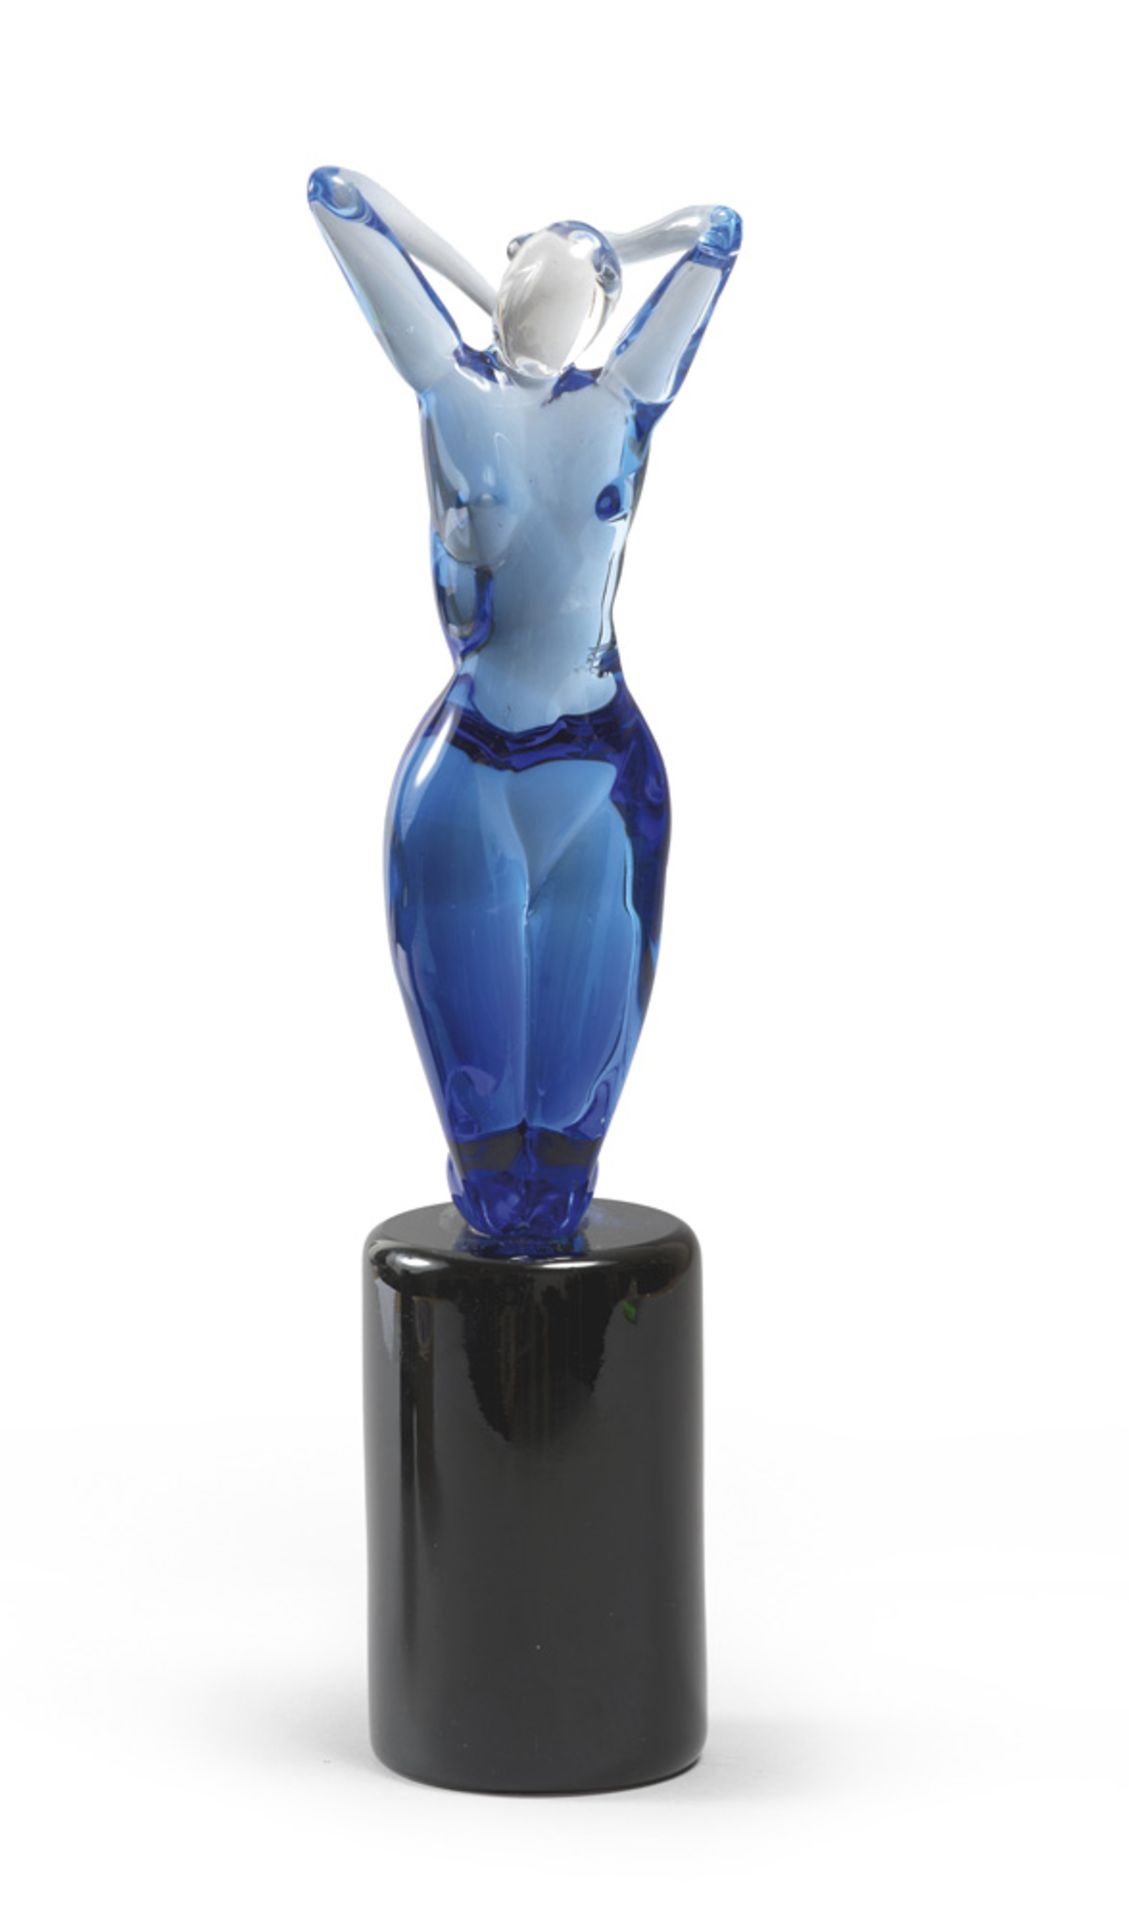 GLASS WOMAN'S FIGURE, MURANO 60'S with blue found, blue glass cylinder base. Measures cm. 41 x 10.